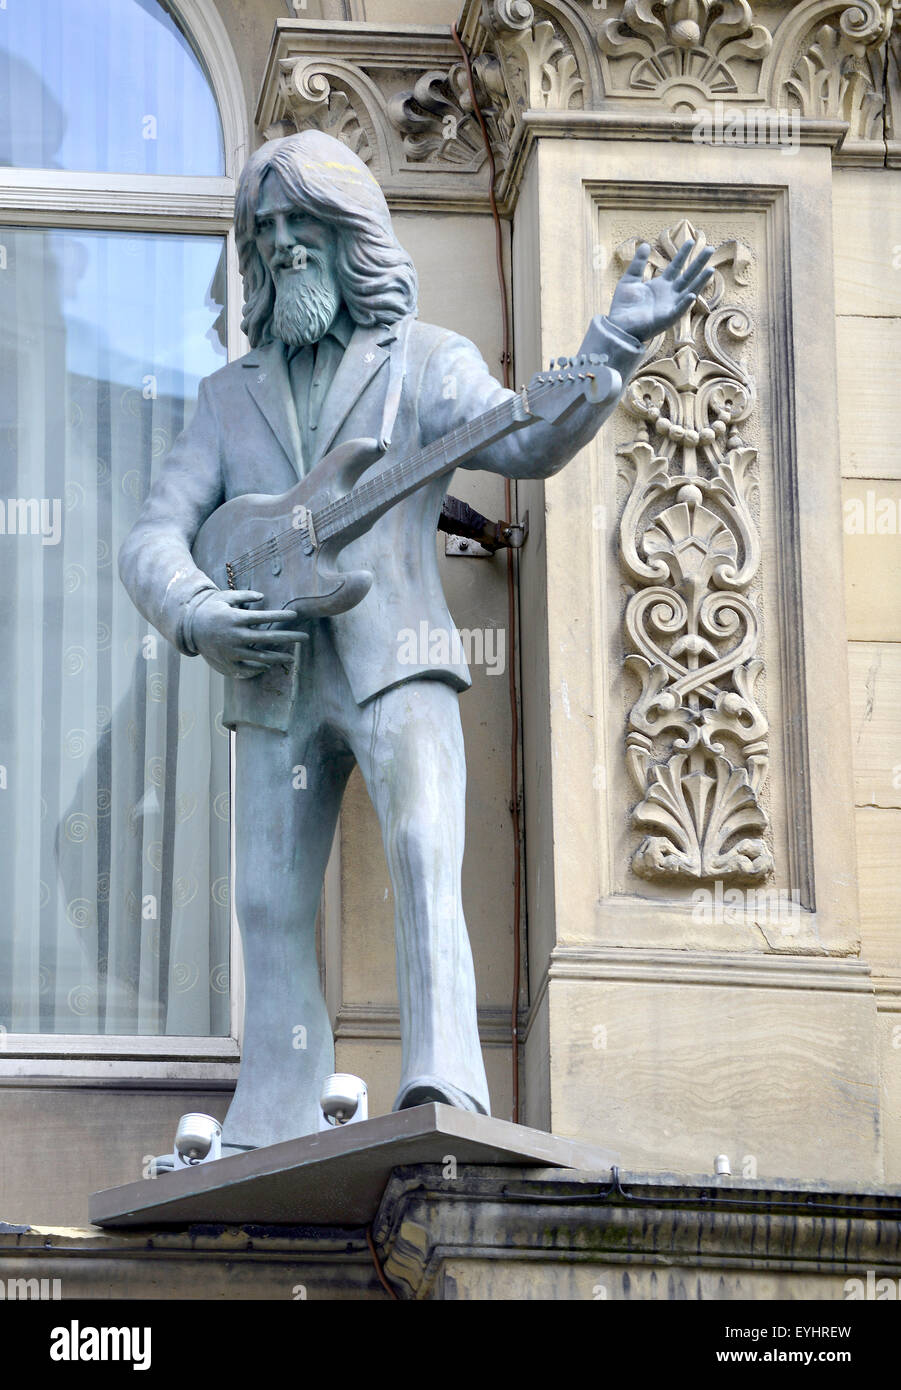 Statue of George Harrison on the exterior of the Hard Day's Night Hotel. The City of Liverpool, Britain, UK Stock Photo